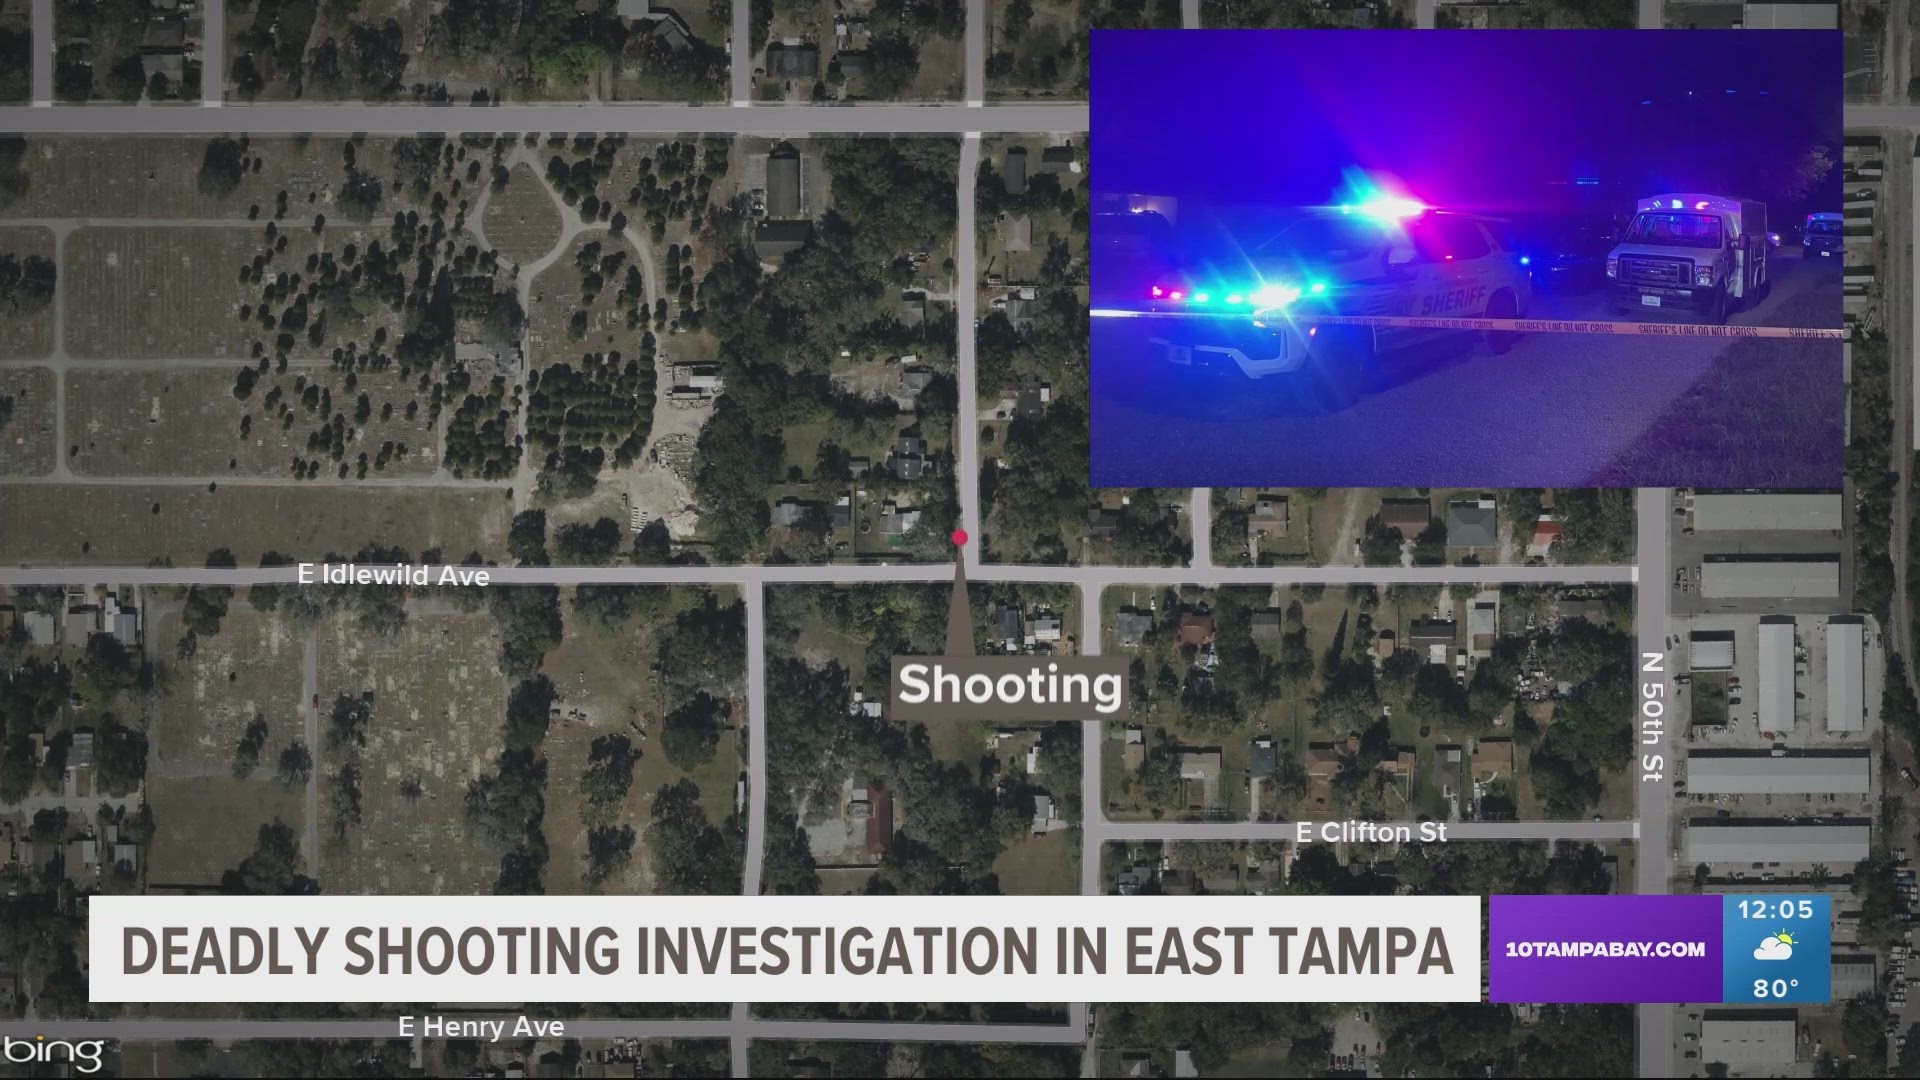 At this time, deputies determined people involved in the shooting all knew each other.